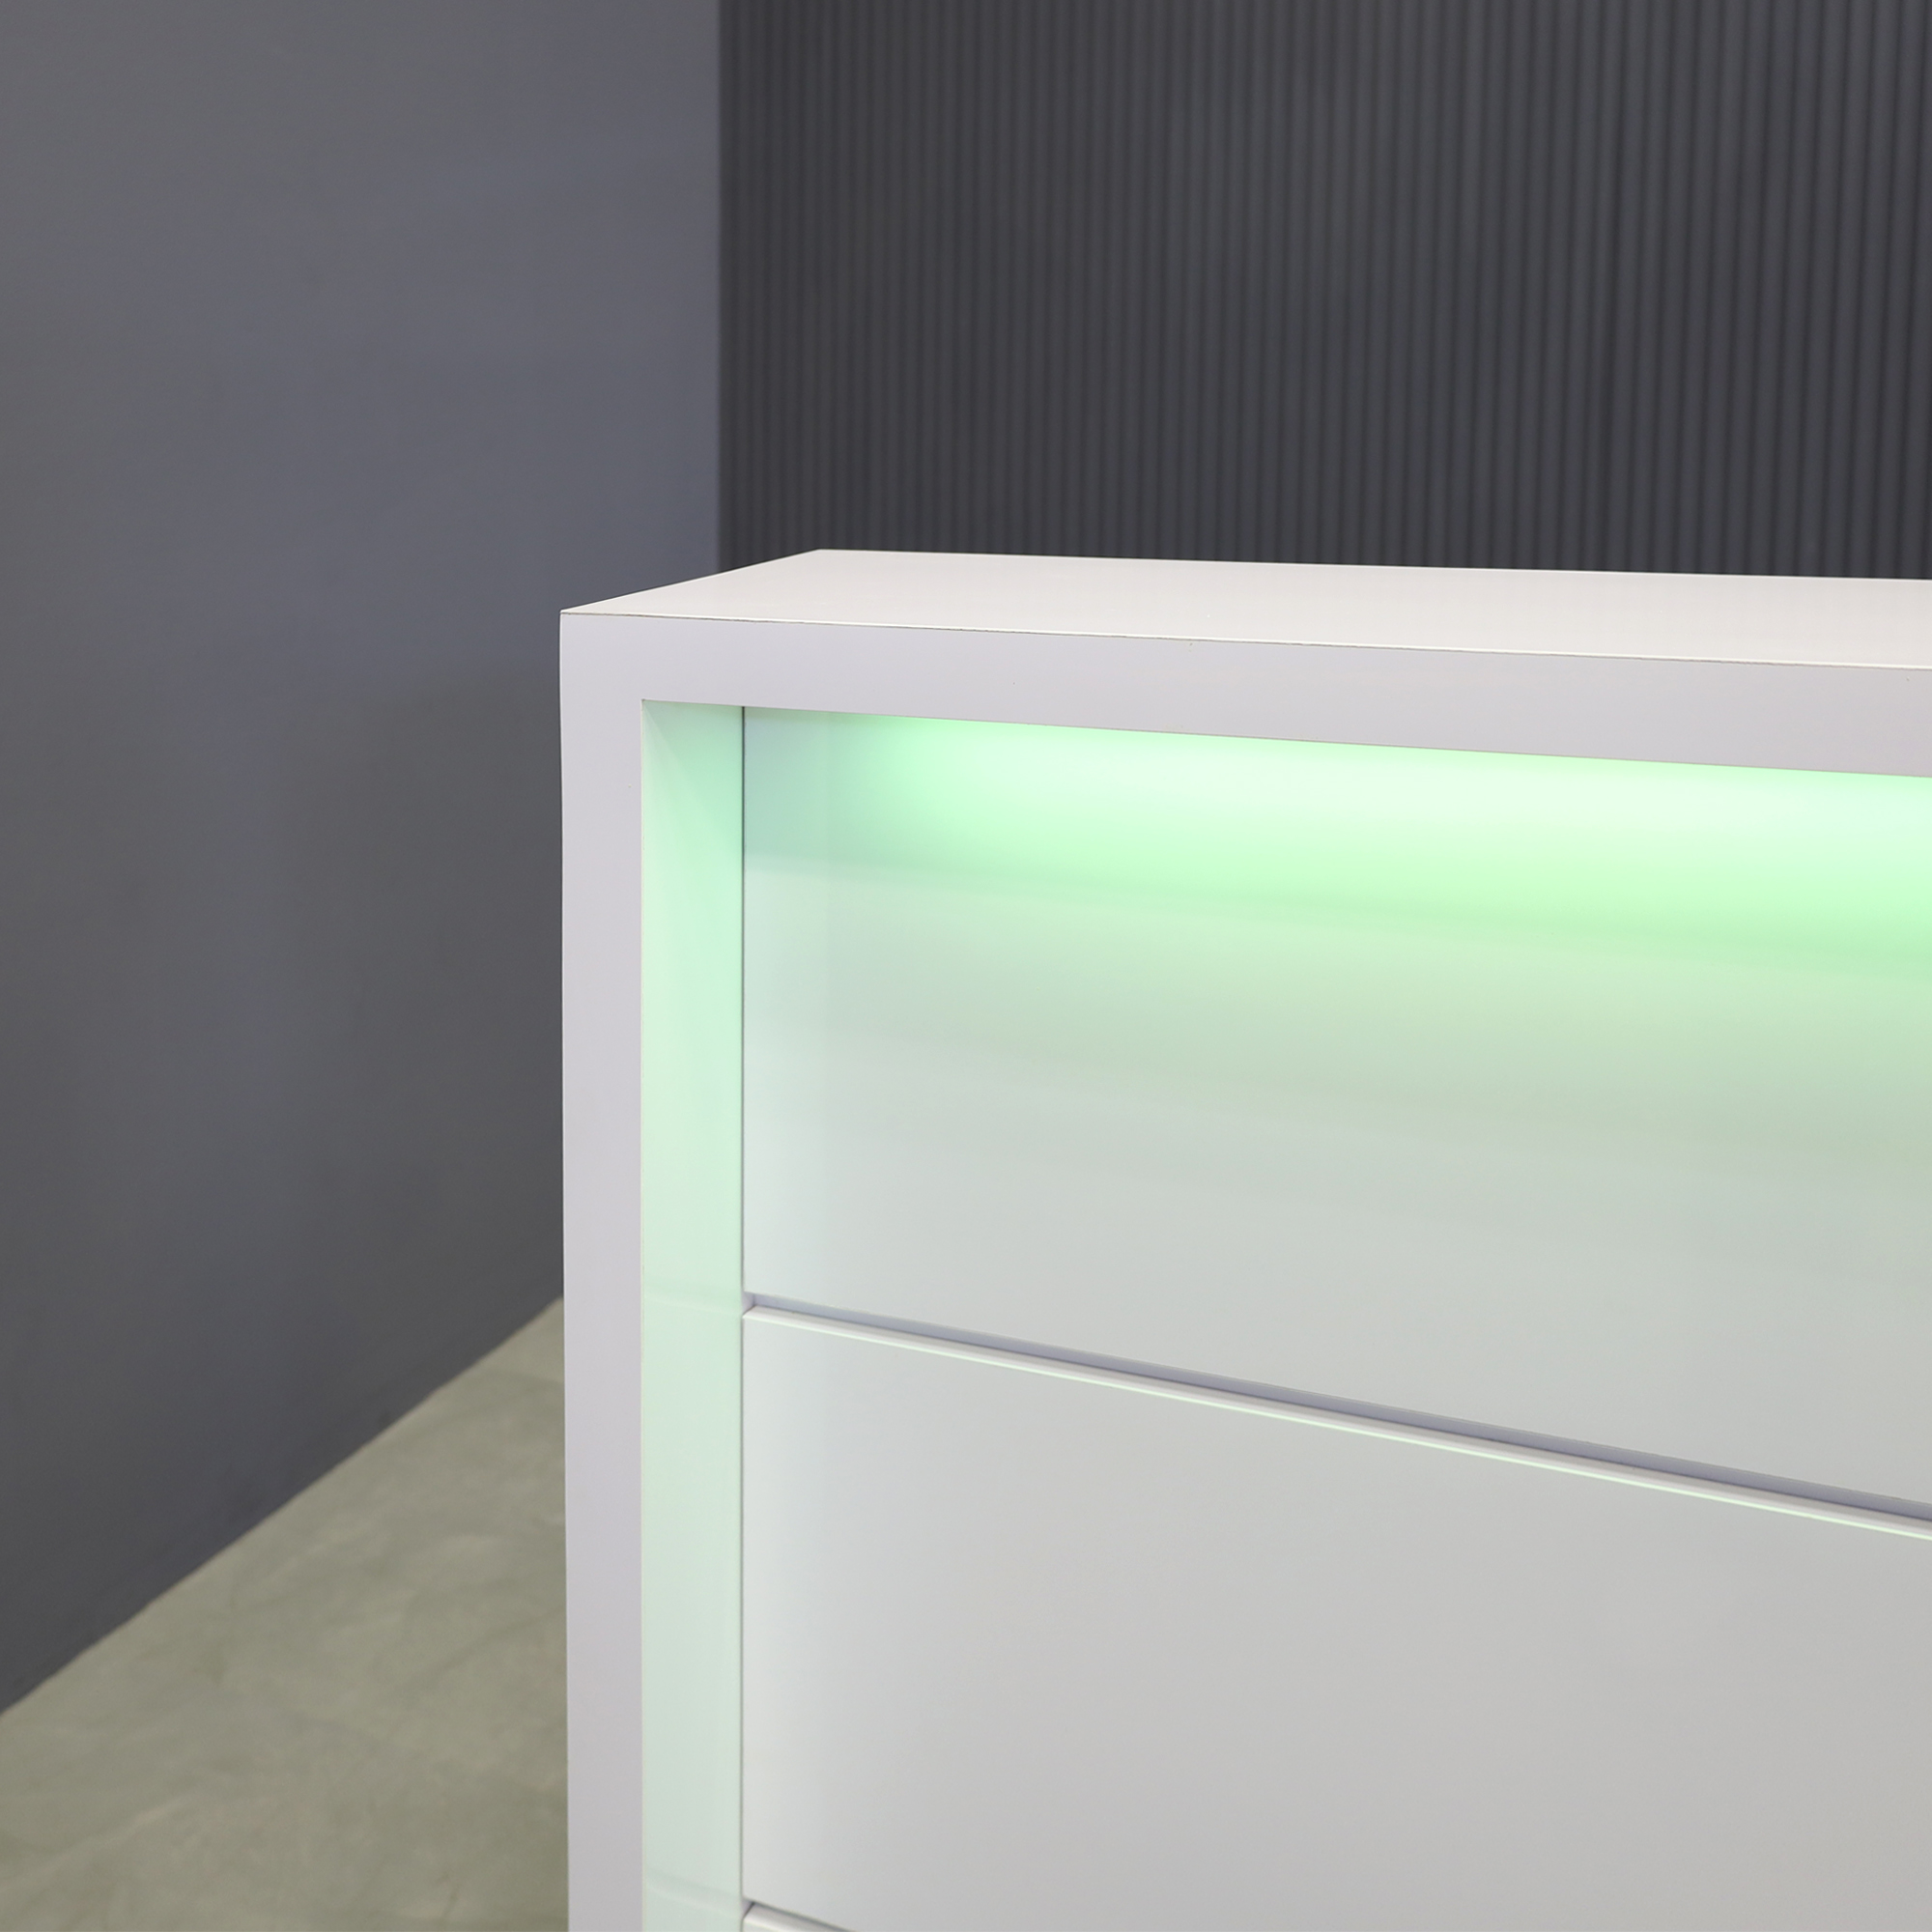 60-inch New Jersey Reception Desk in white gloss laminate desk and front panels, brushed aluminum toe-kick, with color LED shown here.